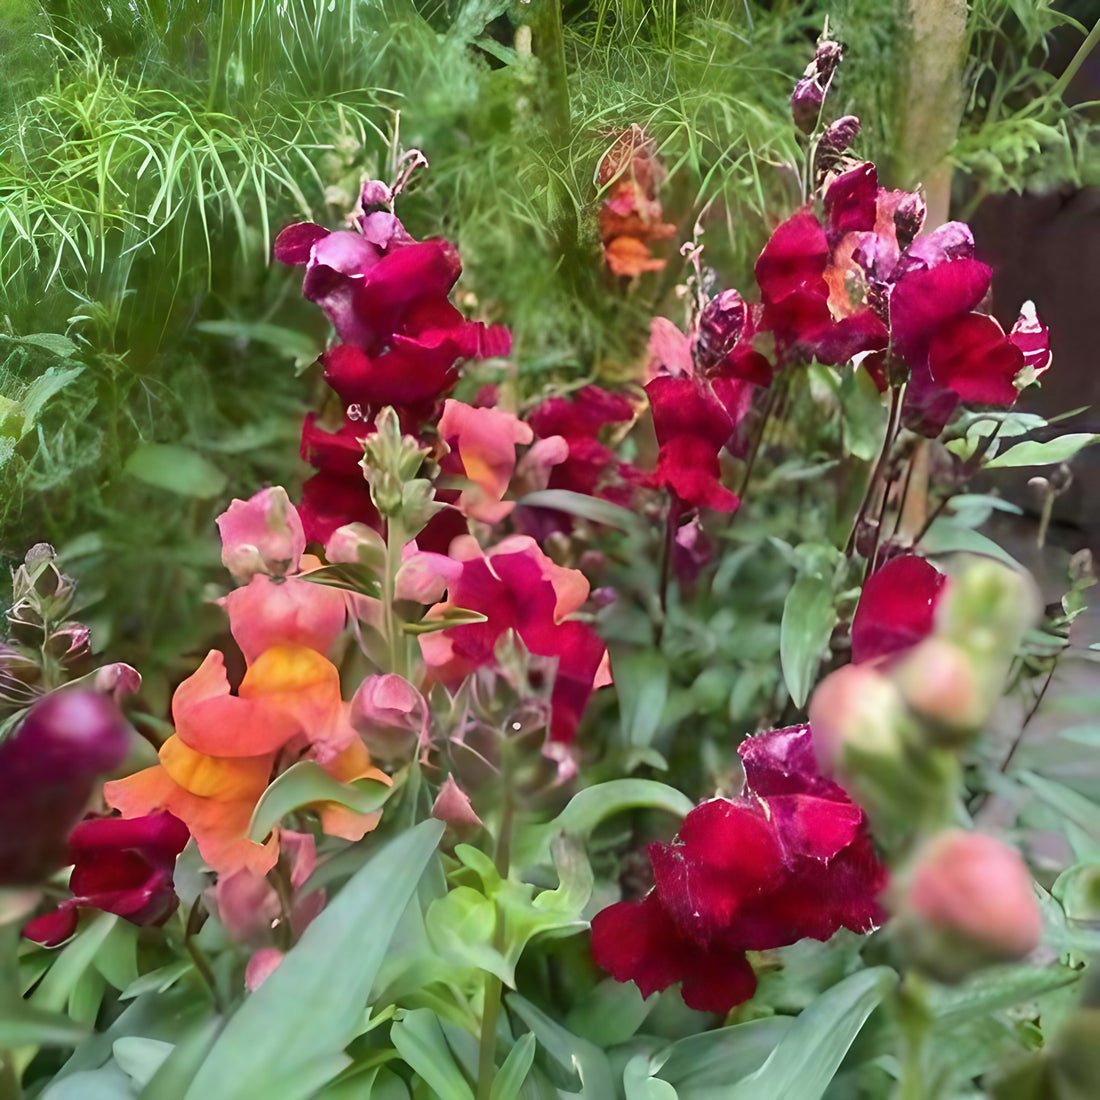 Cluster of Antirrhinum Crown Mixed flowers featuring red and orange petals